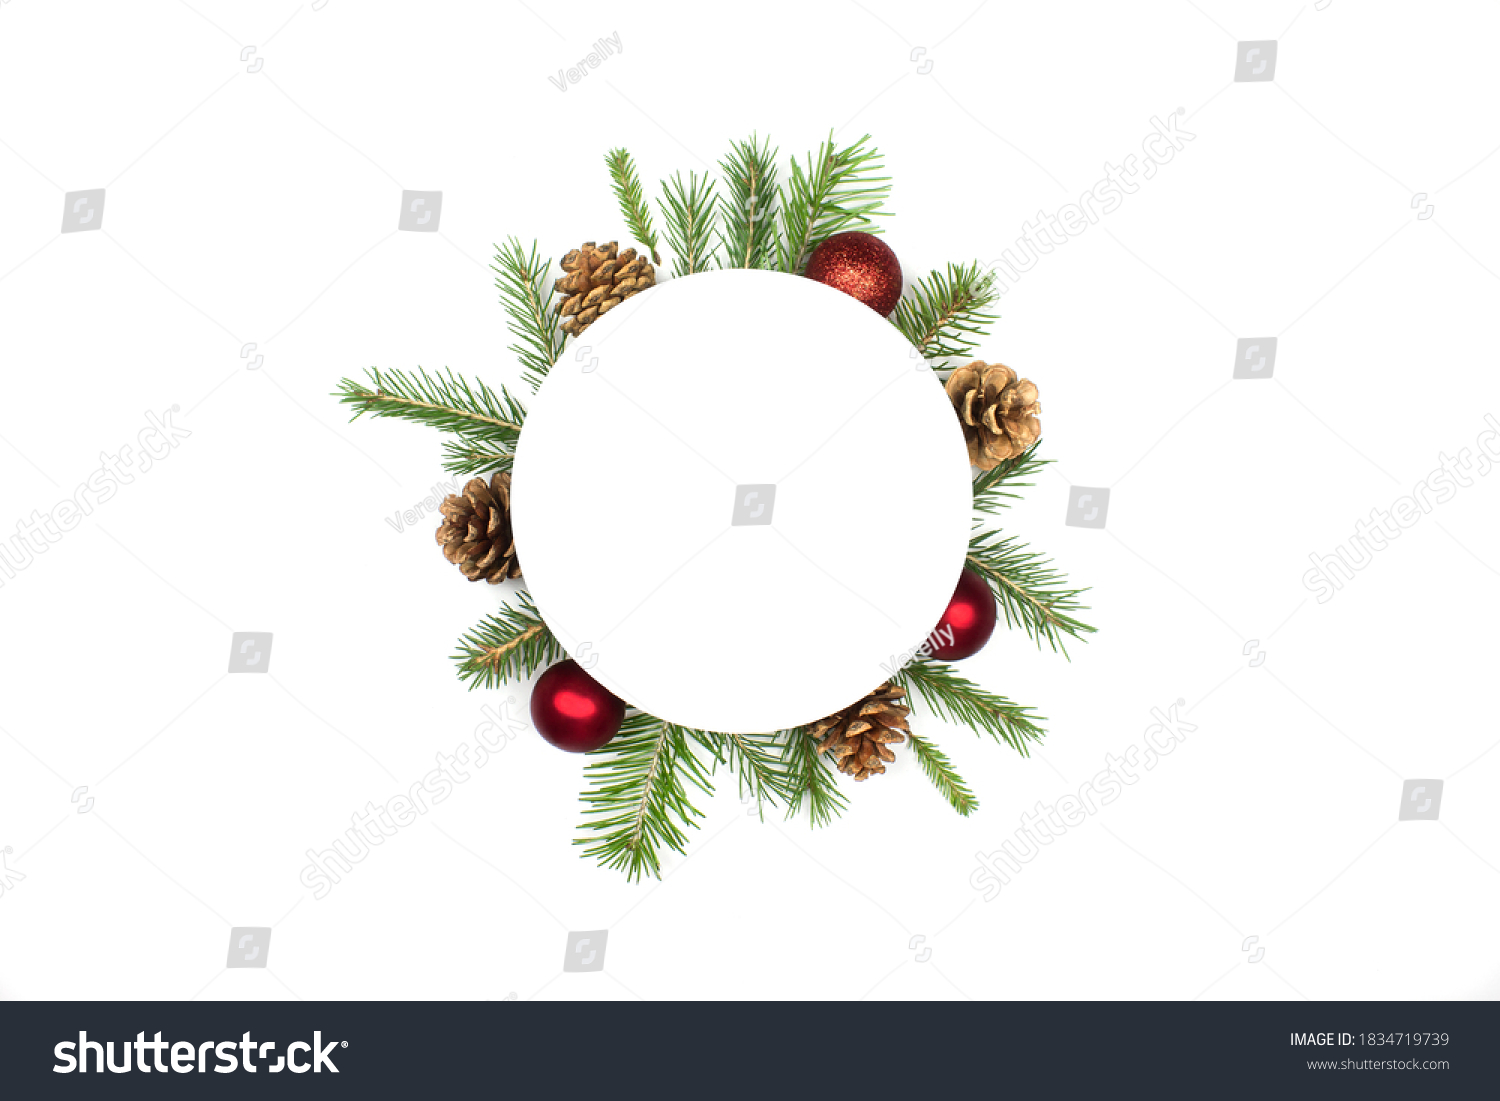 Christmas round frame mockup made of spruce branches, red decorations, fir cones flat lay isolated on white background, copy space. Christmas composition with wreath top view. Xmas celebration #1834719739